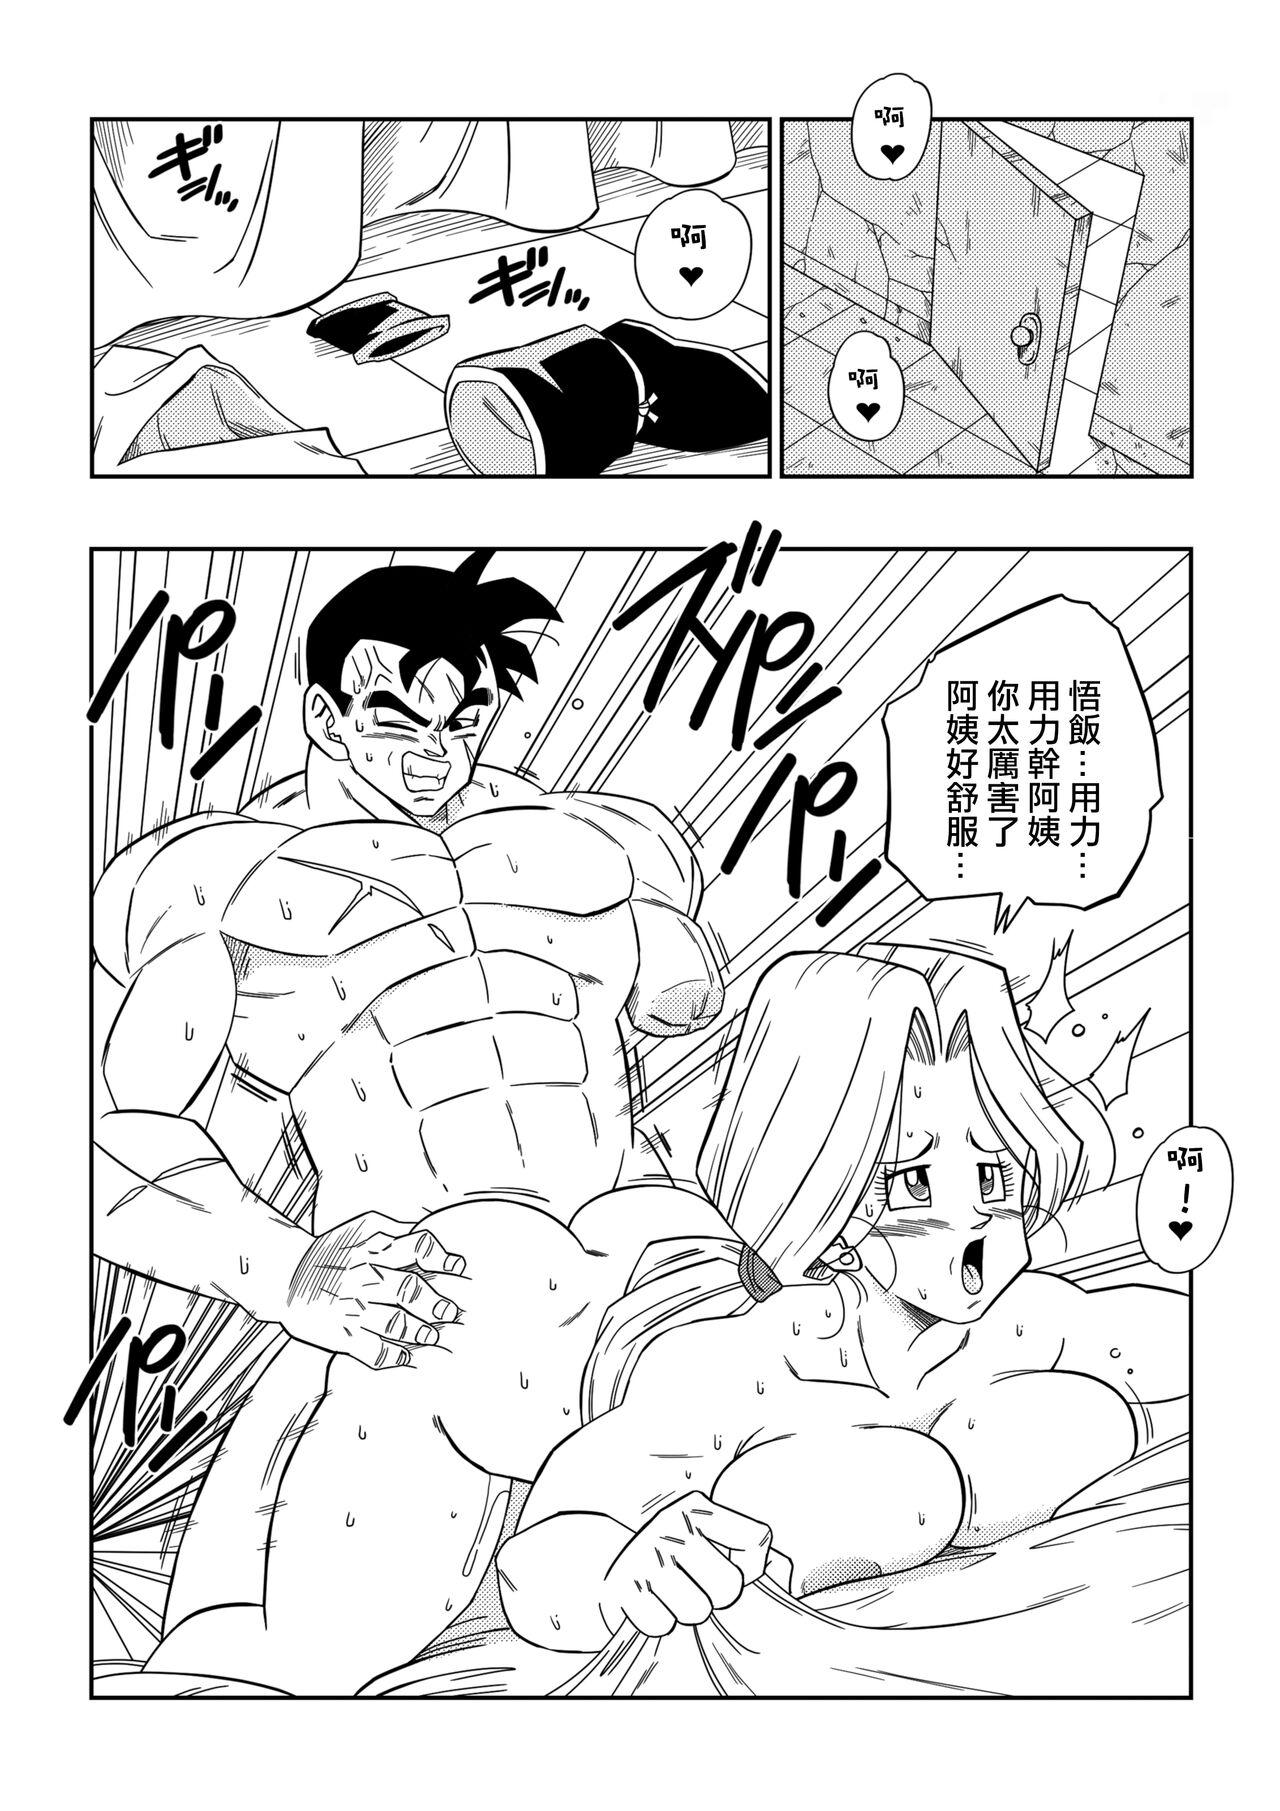 Amateur Cum Lost of sex in this Future! - BULMA and GOHAN - Dragon ball z Cornudo - Page 5